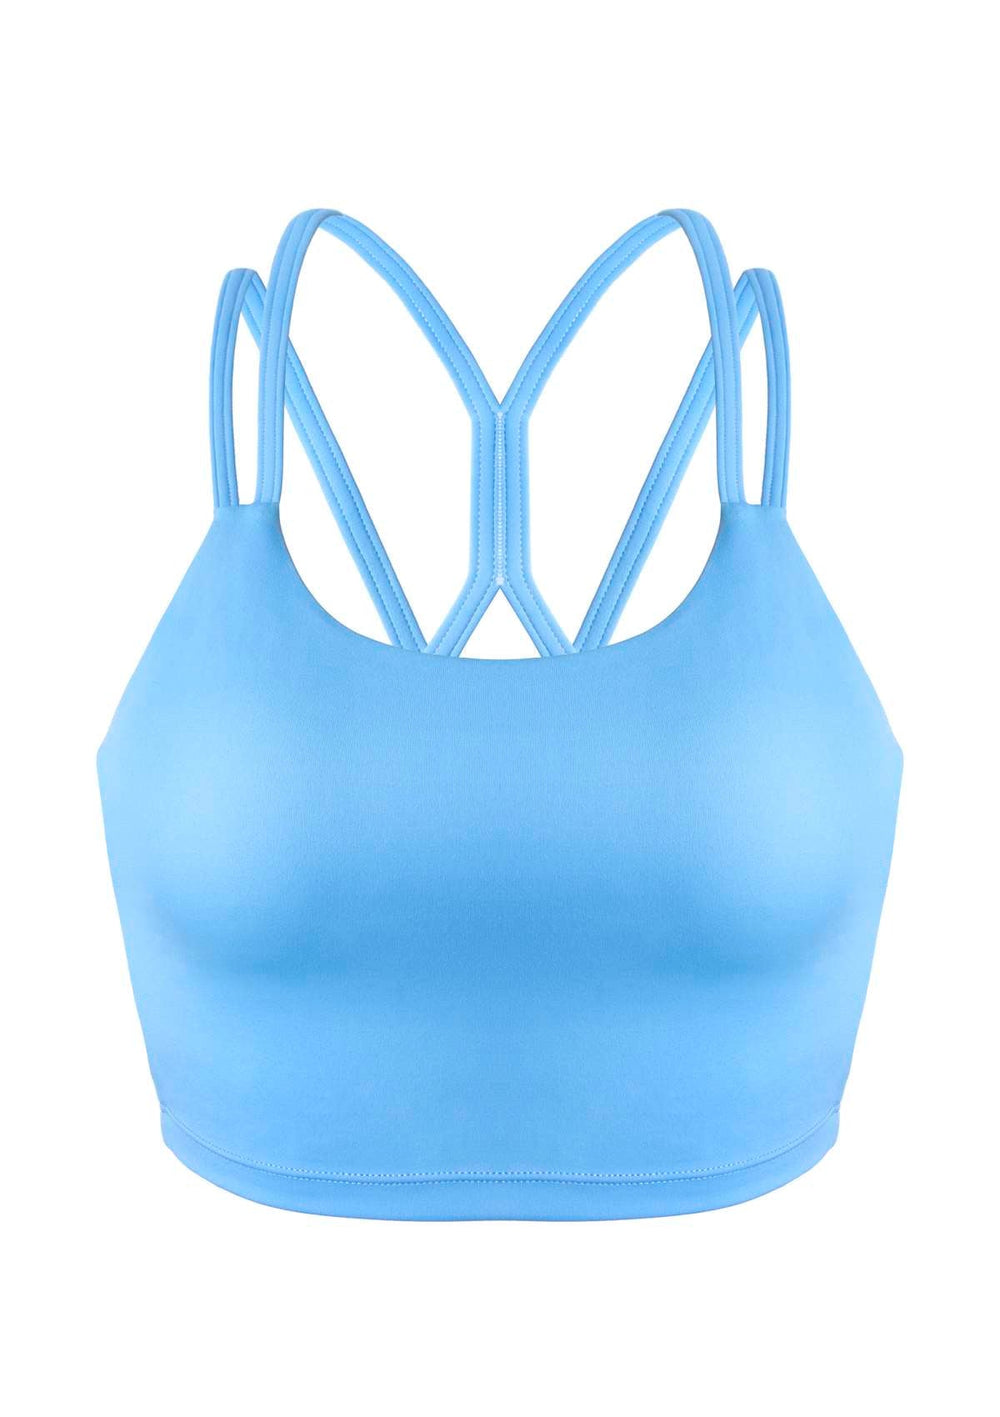 Nessa Xavia Soft N-500 Women's Blue Non-Padded Underwired Full Cup